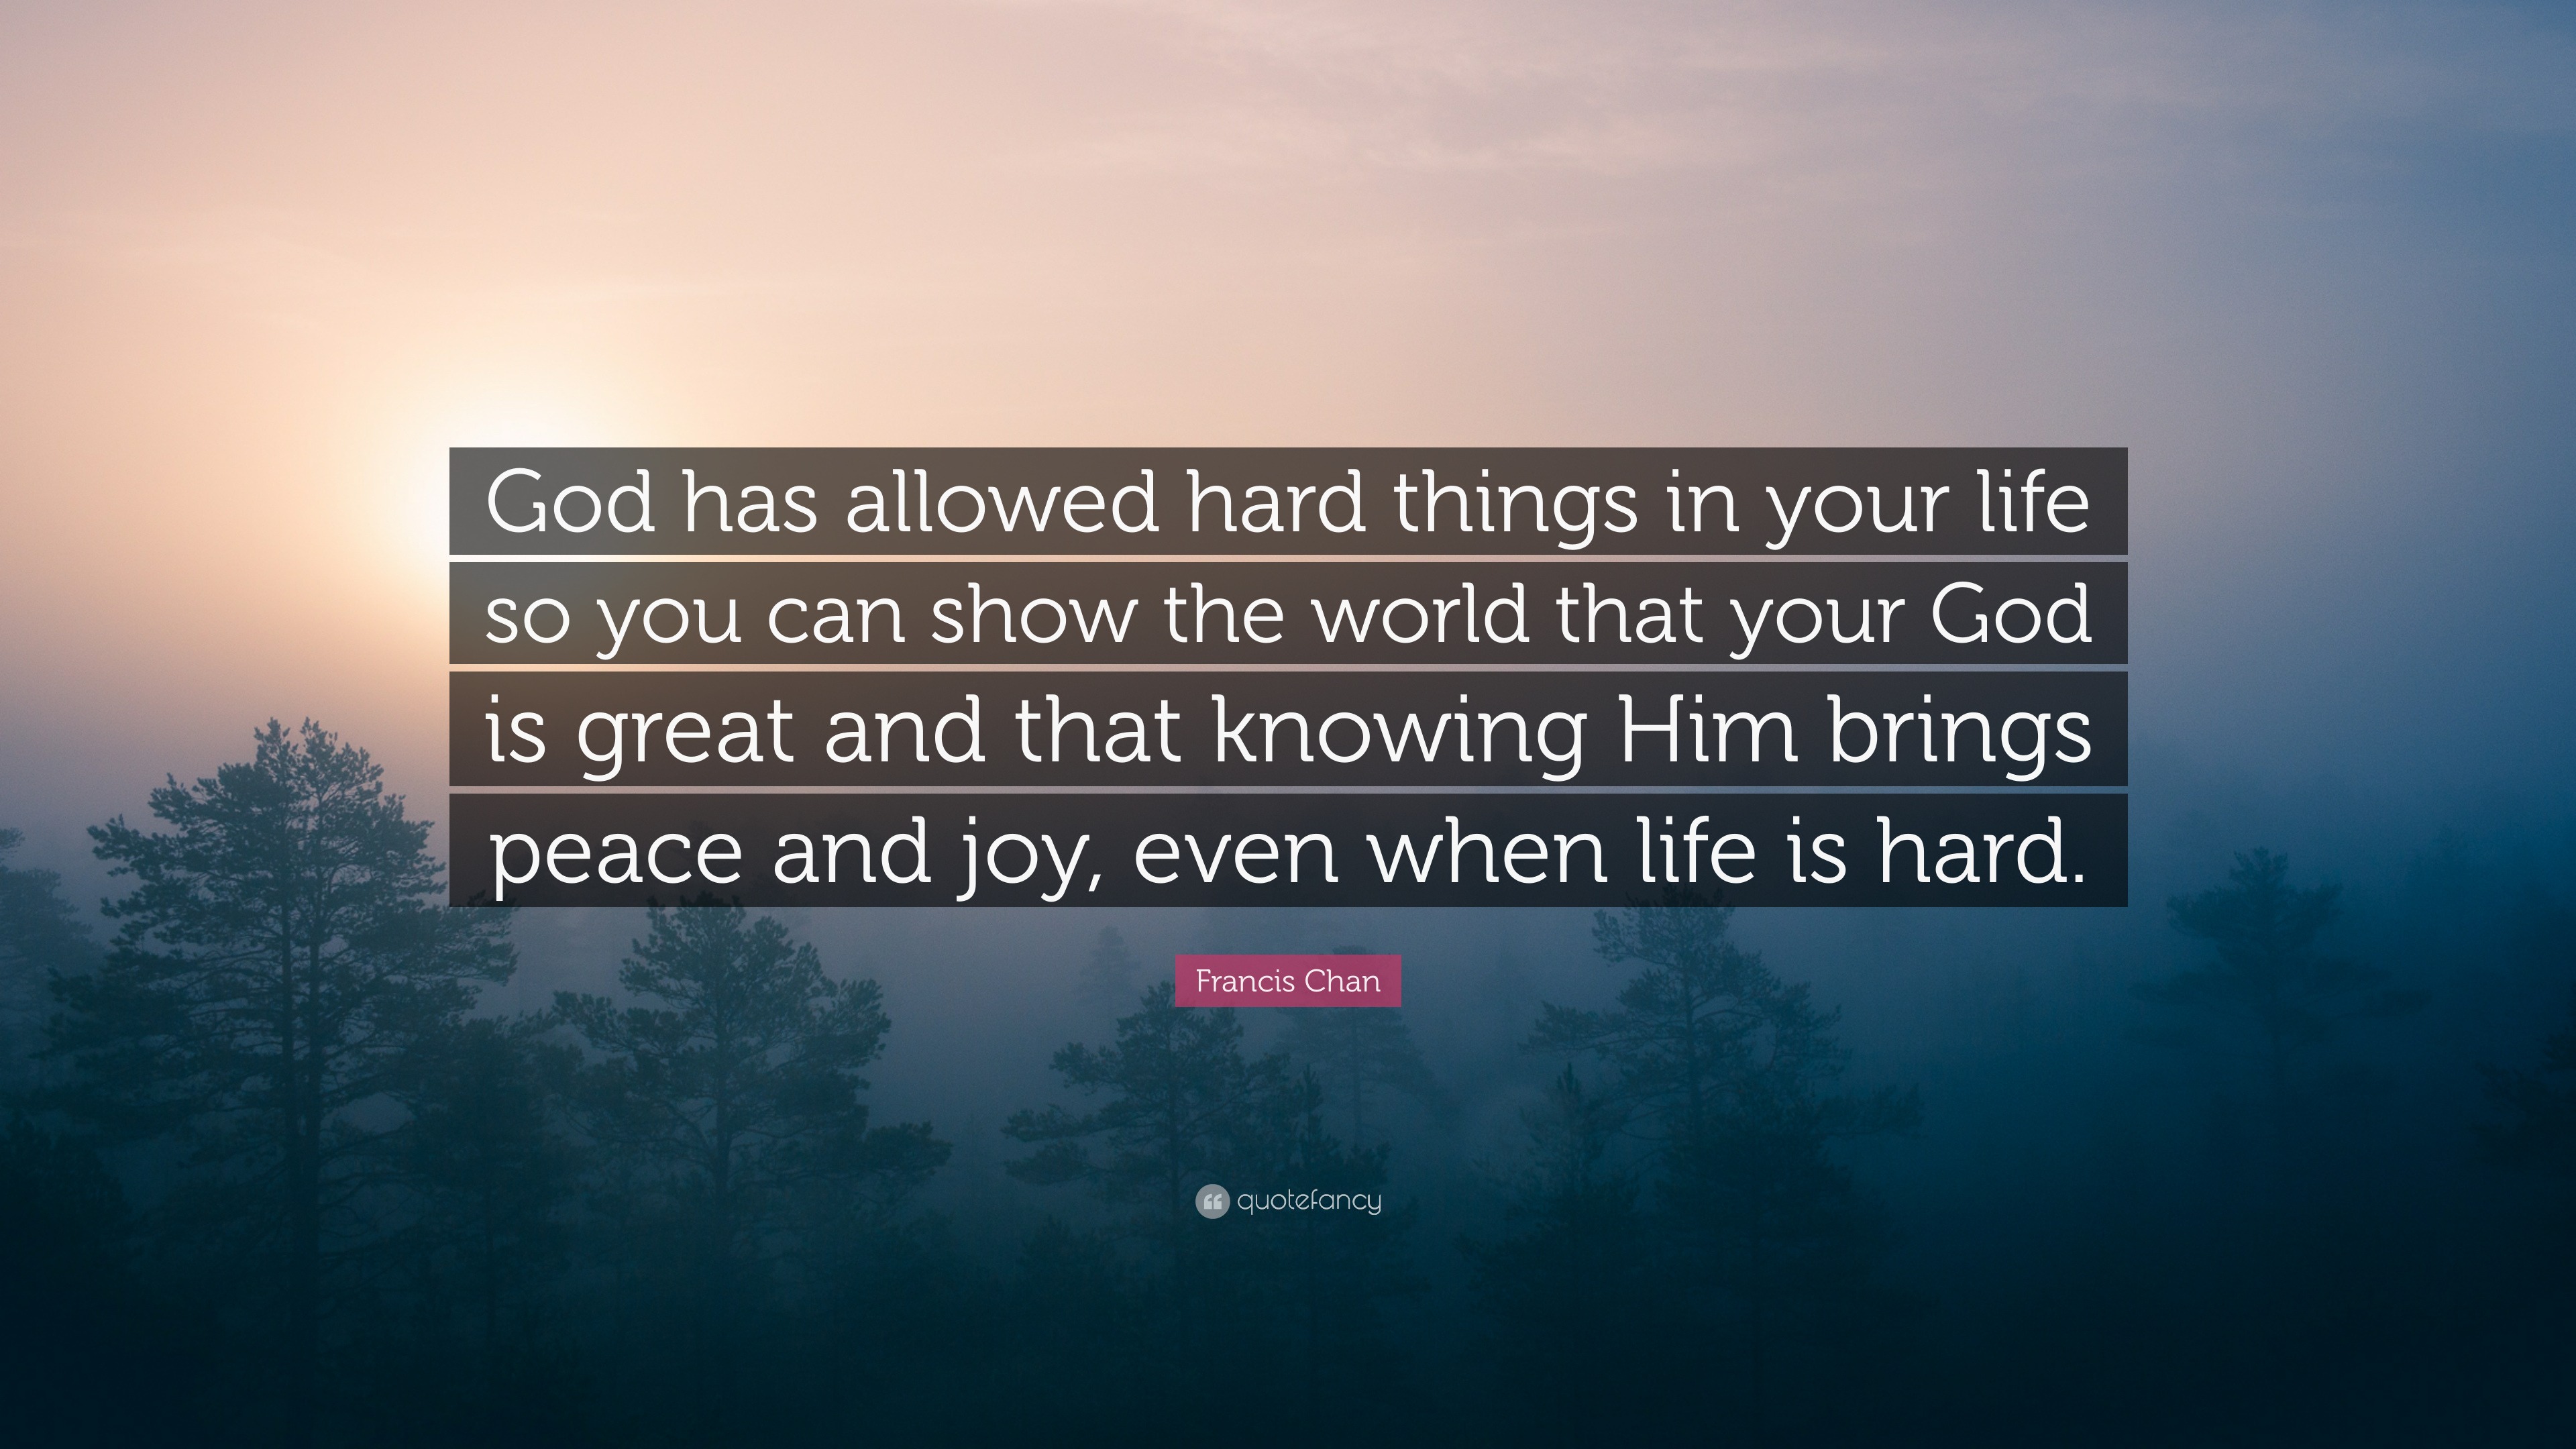 Francis Chan Quote “God has allowed hard things in your life so you can